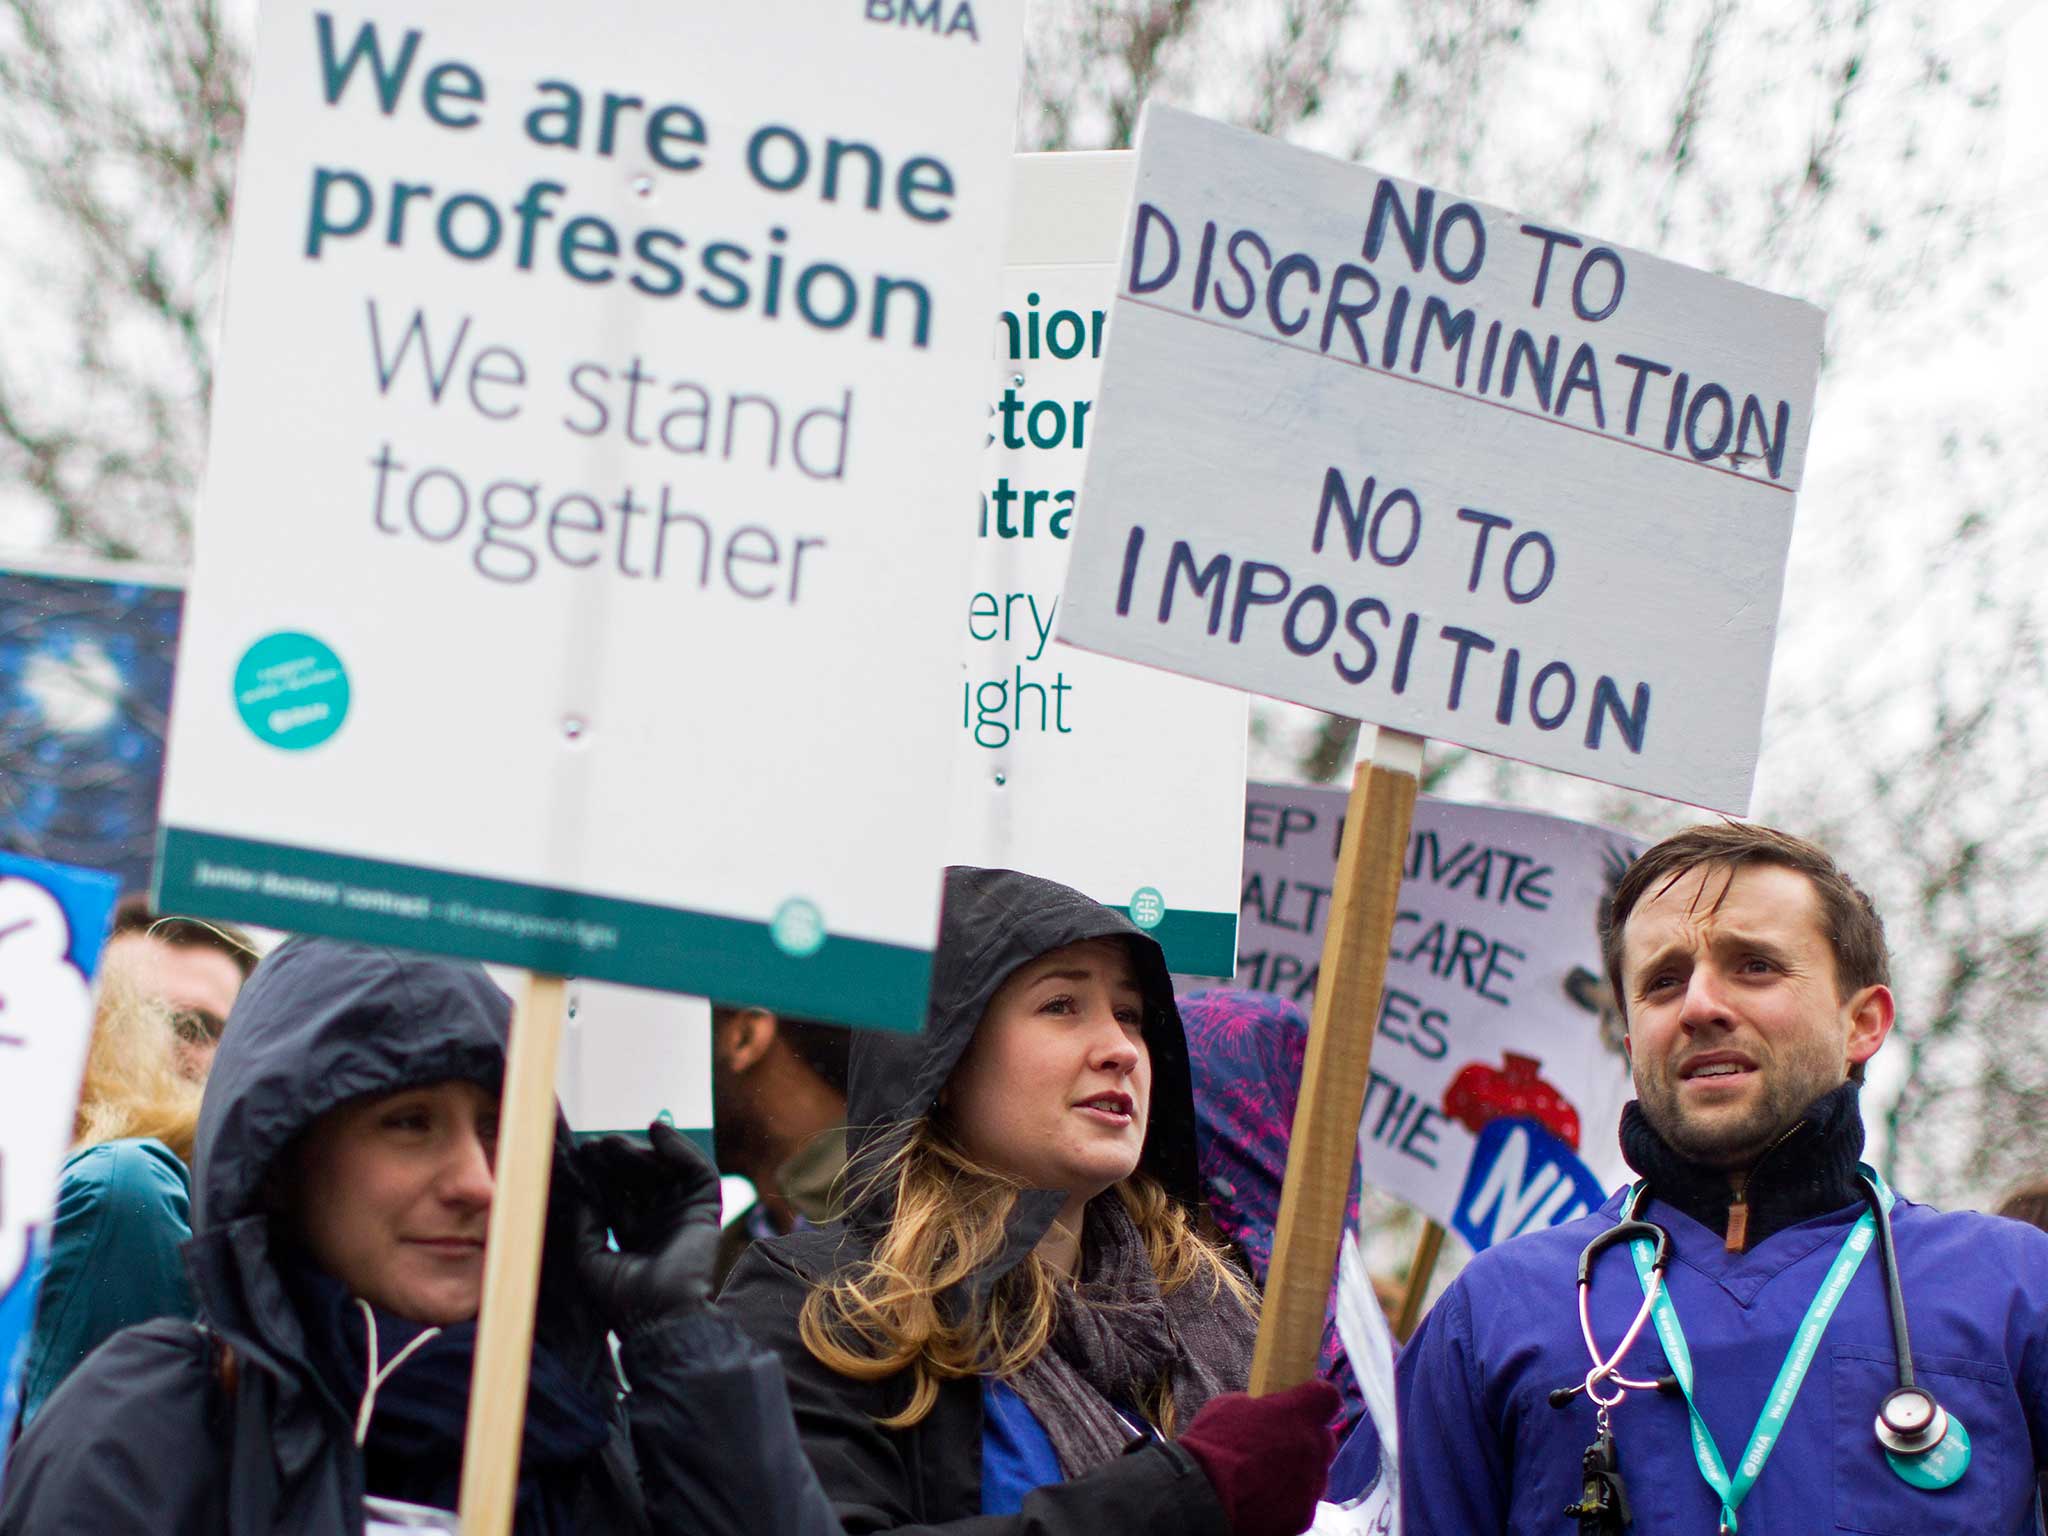 Demonstrators hold placards as they protest during a Junior Doctors' strike outside St Thomas' Hospital in central London